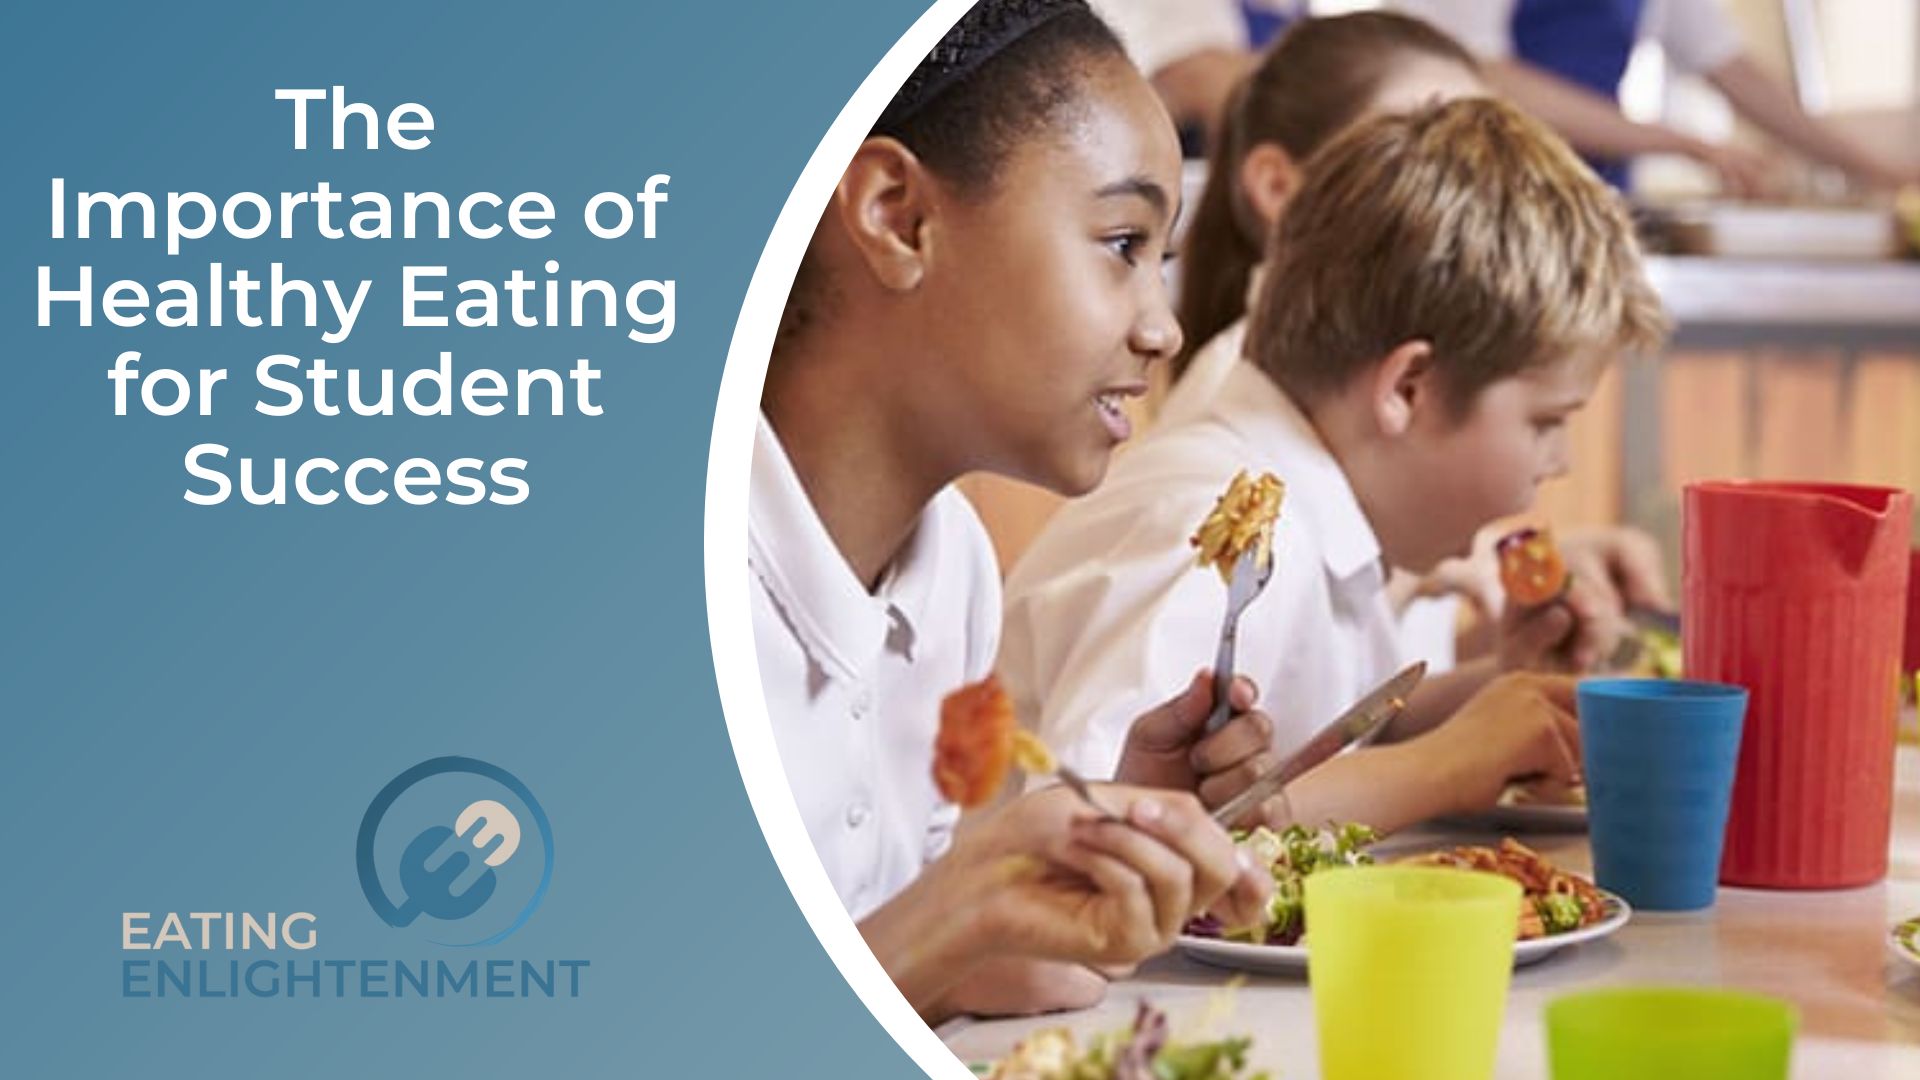 The Importance of Healthy Eating for Student Success